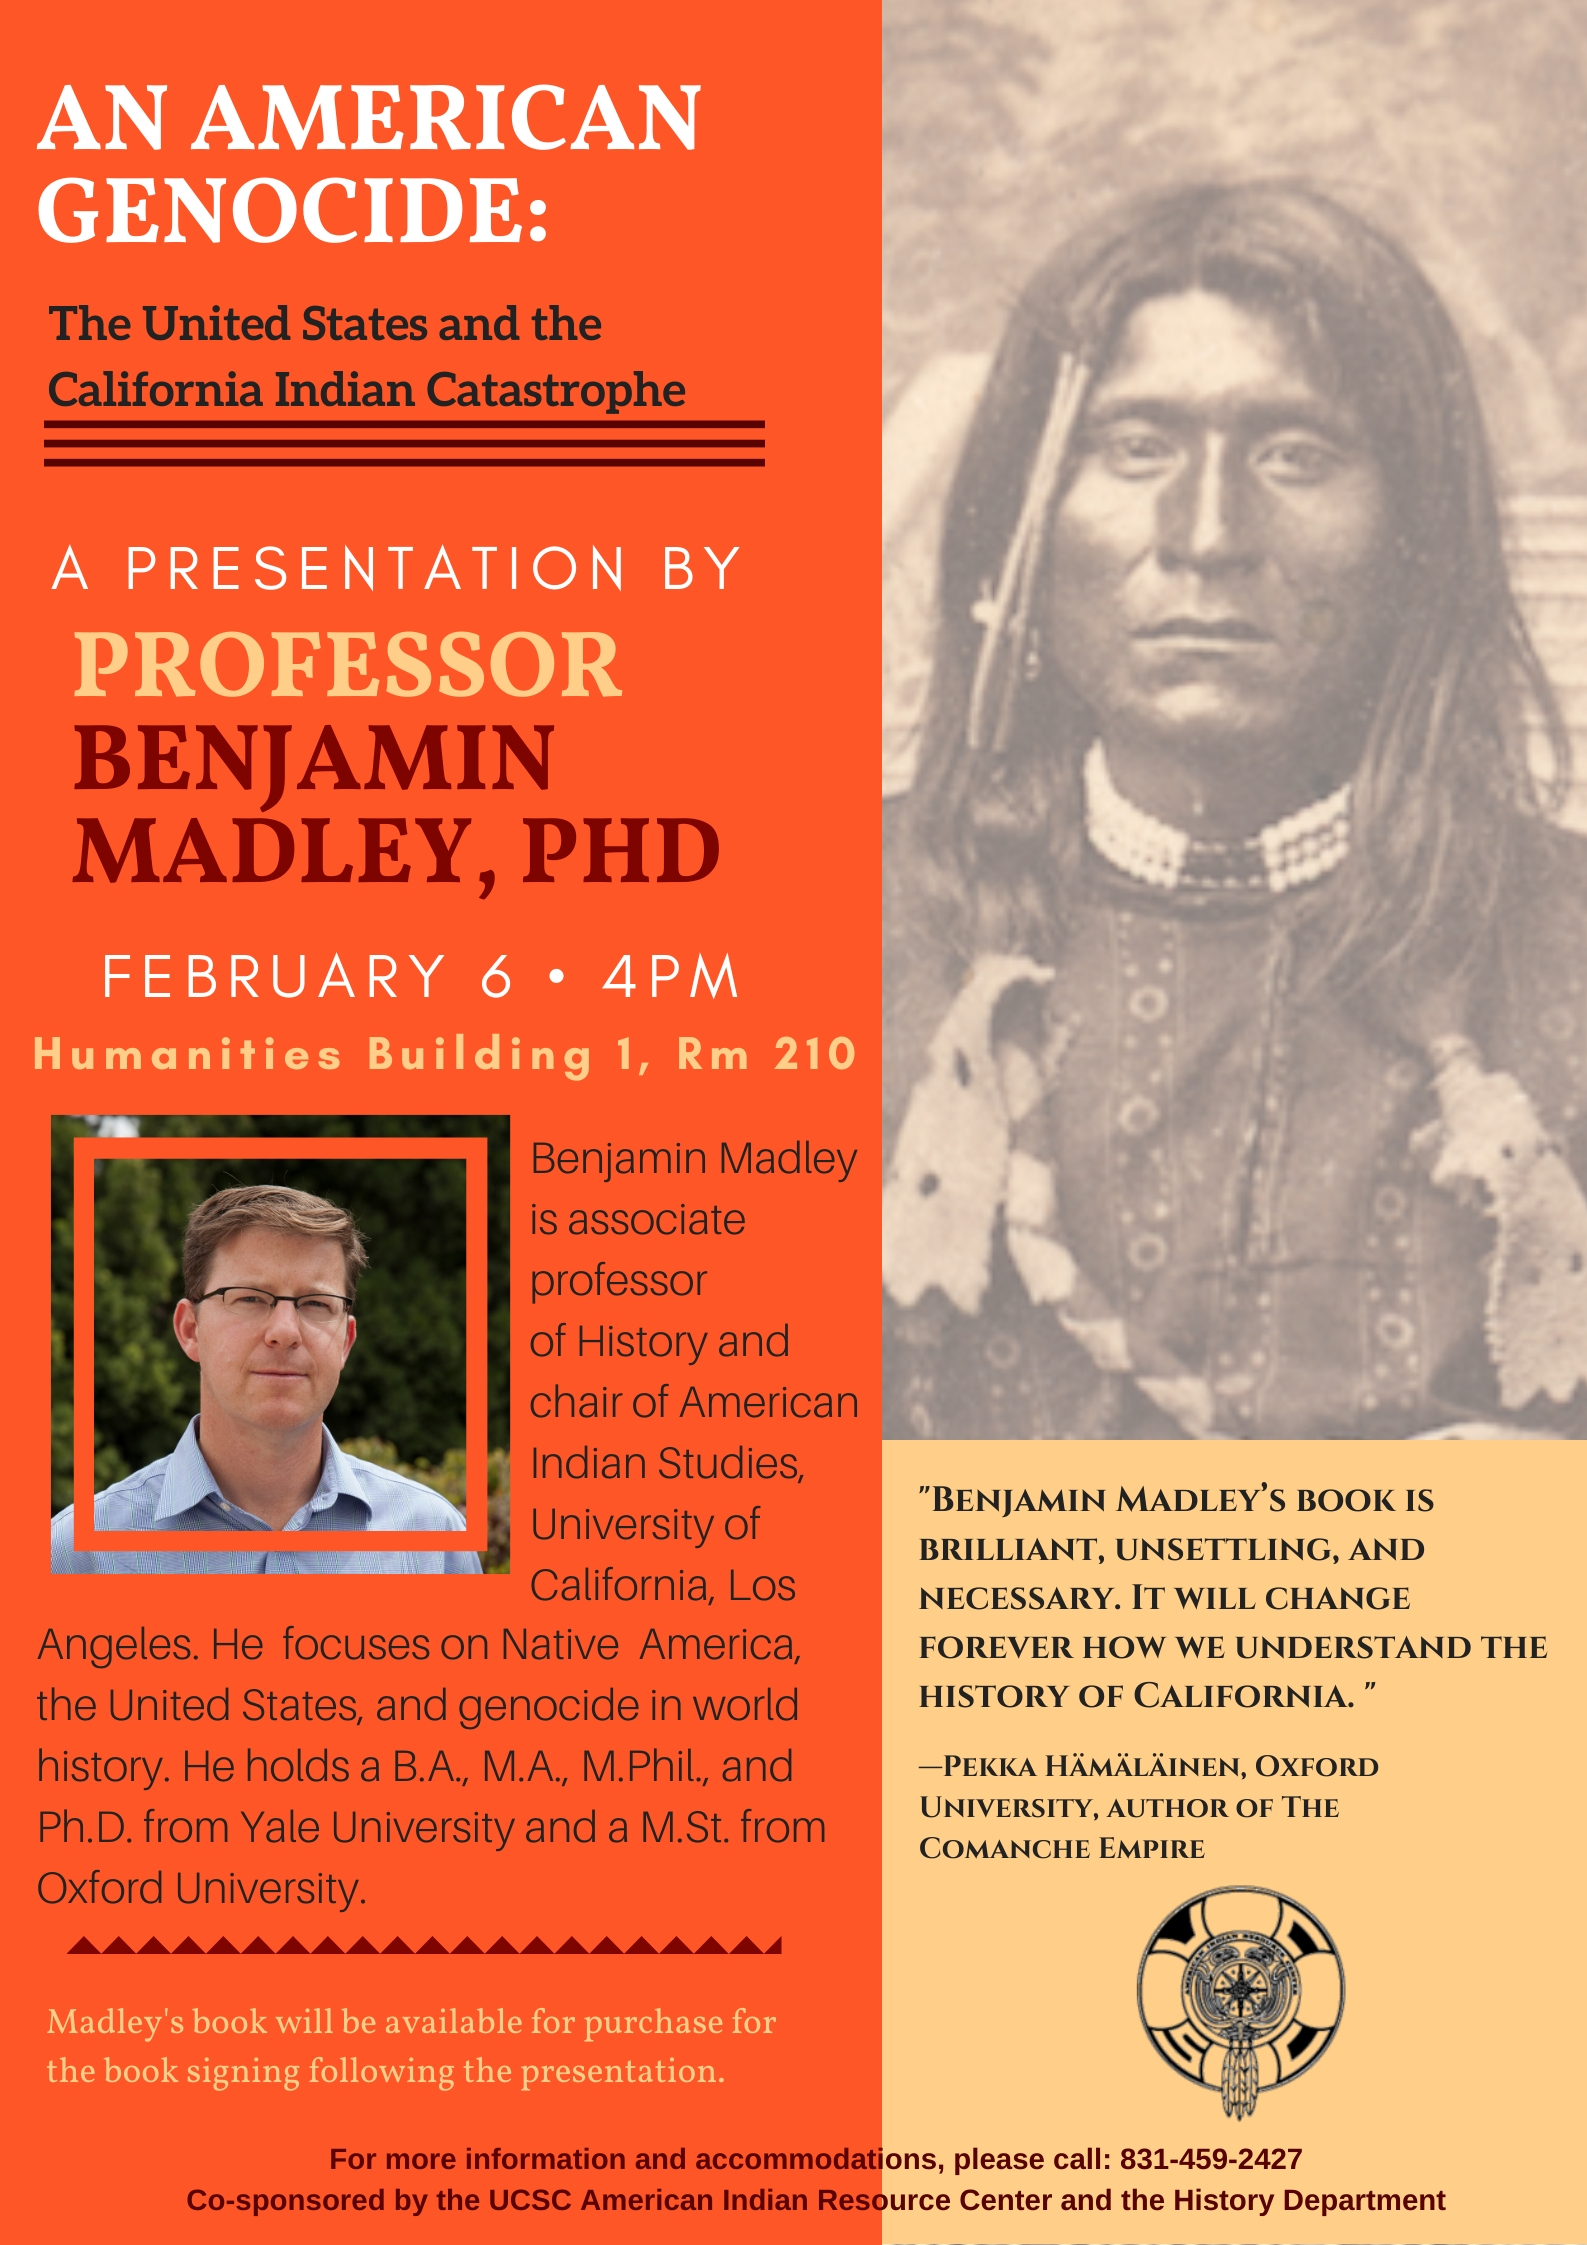 An American Genocide: The United States and California Indian Catastrophe with Professor Benjamin Madley, Ph.D. 